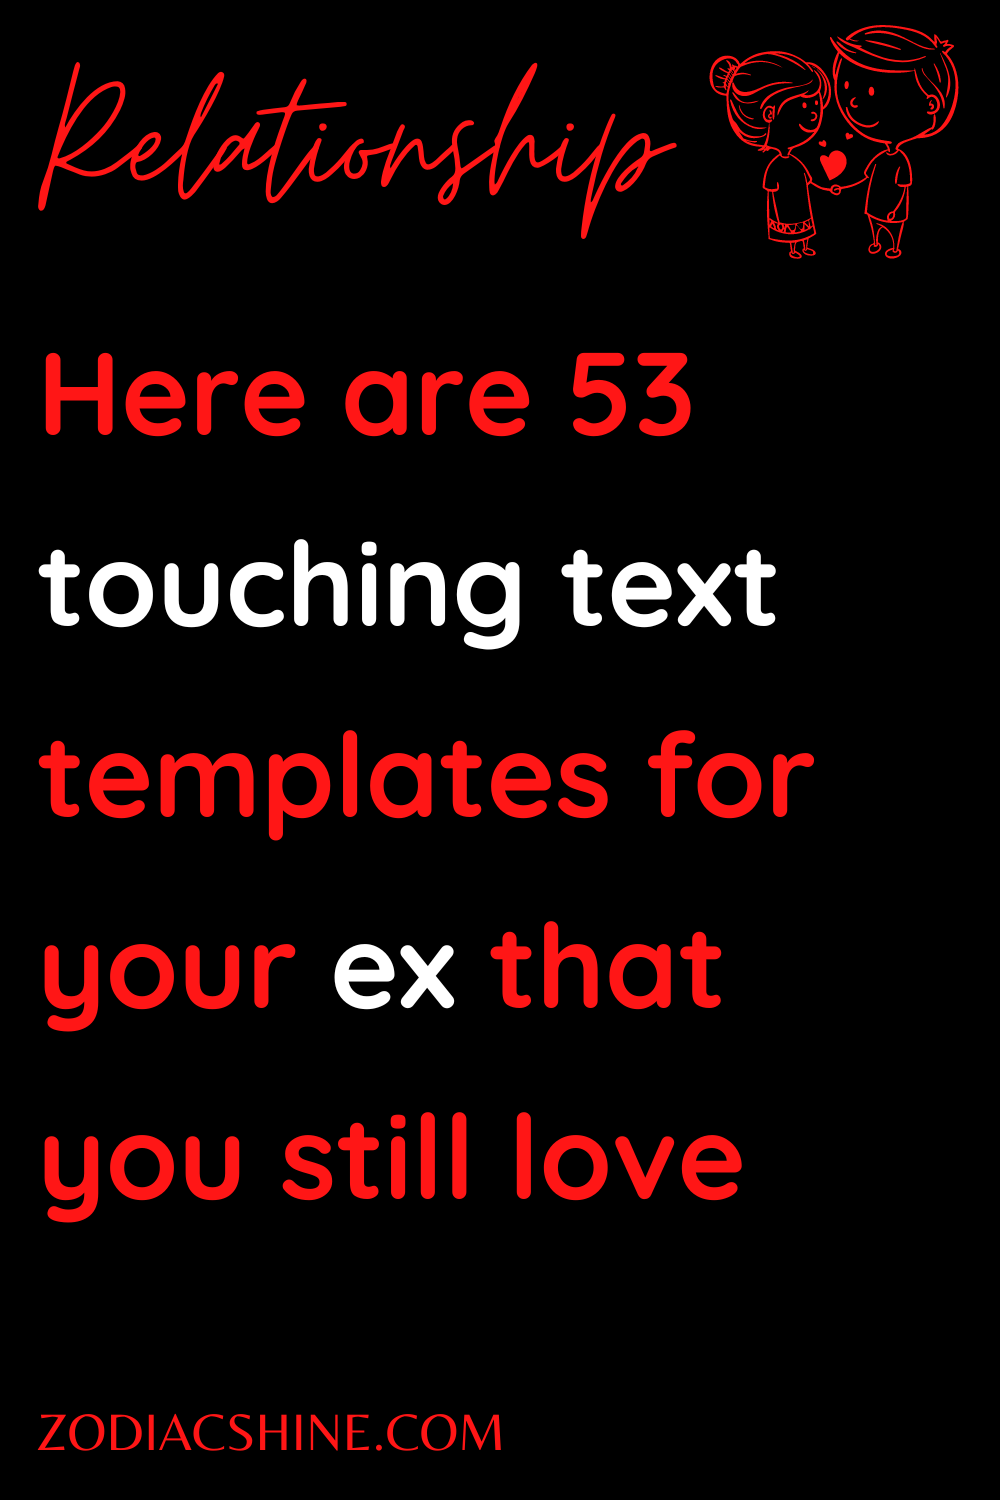 Here are 53 touching text templates for your ex that you still love